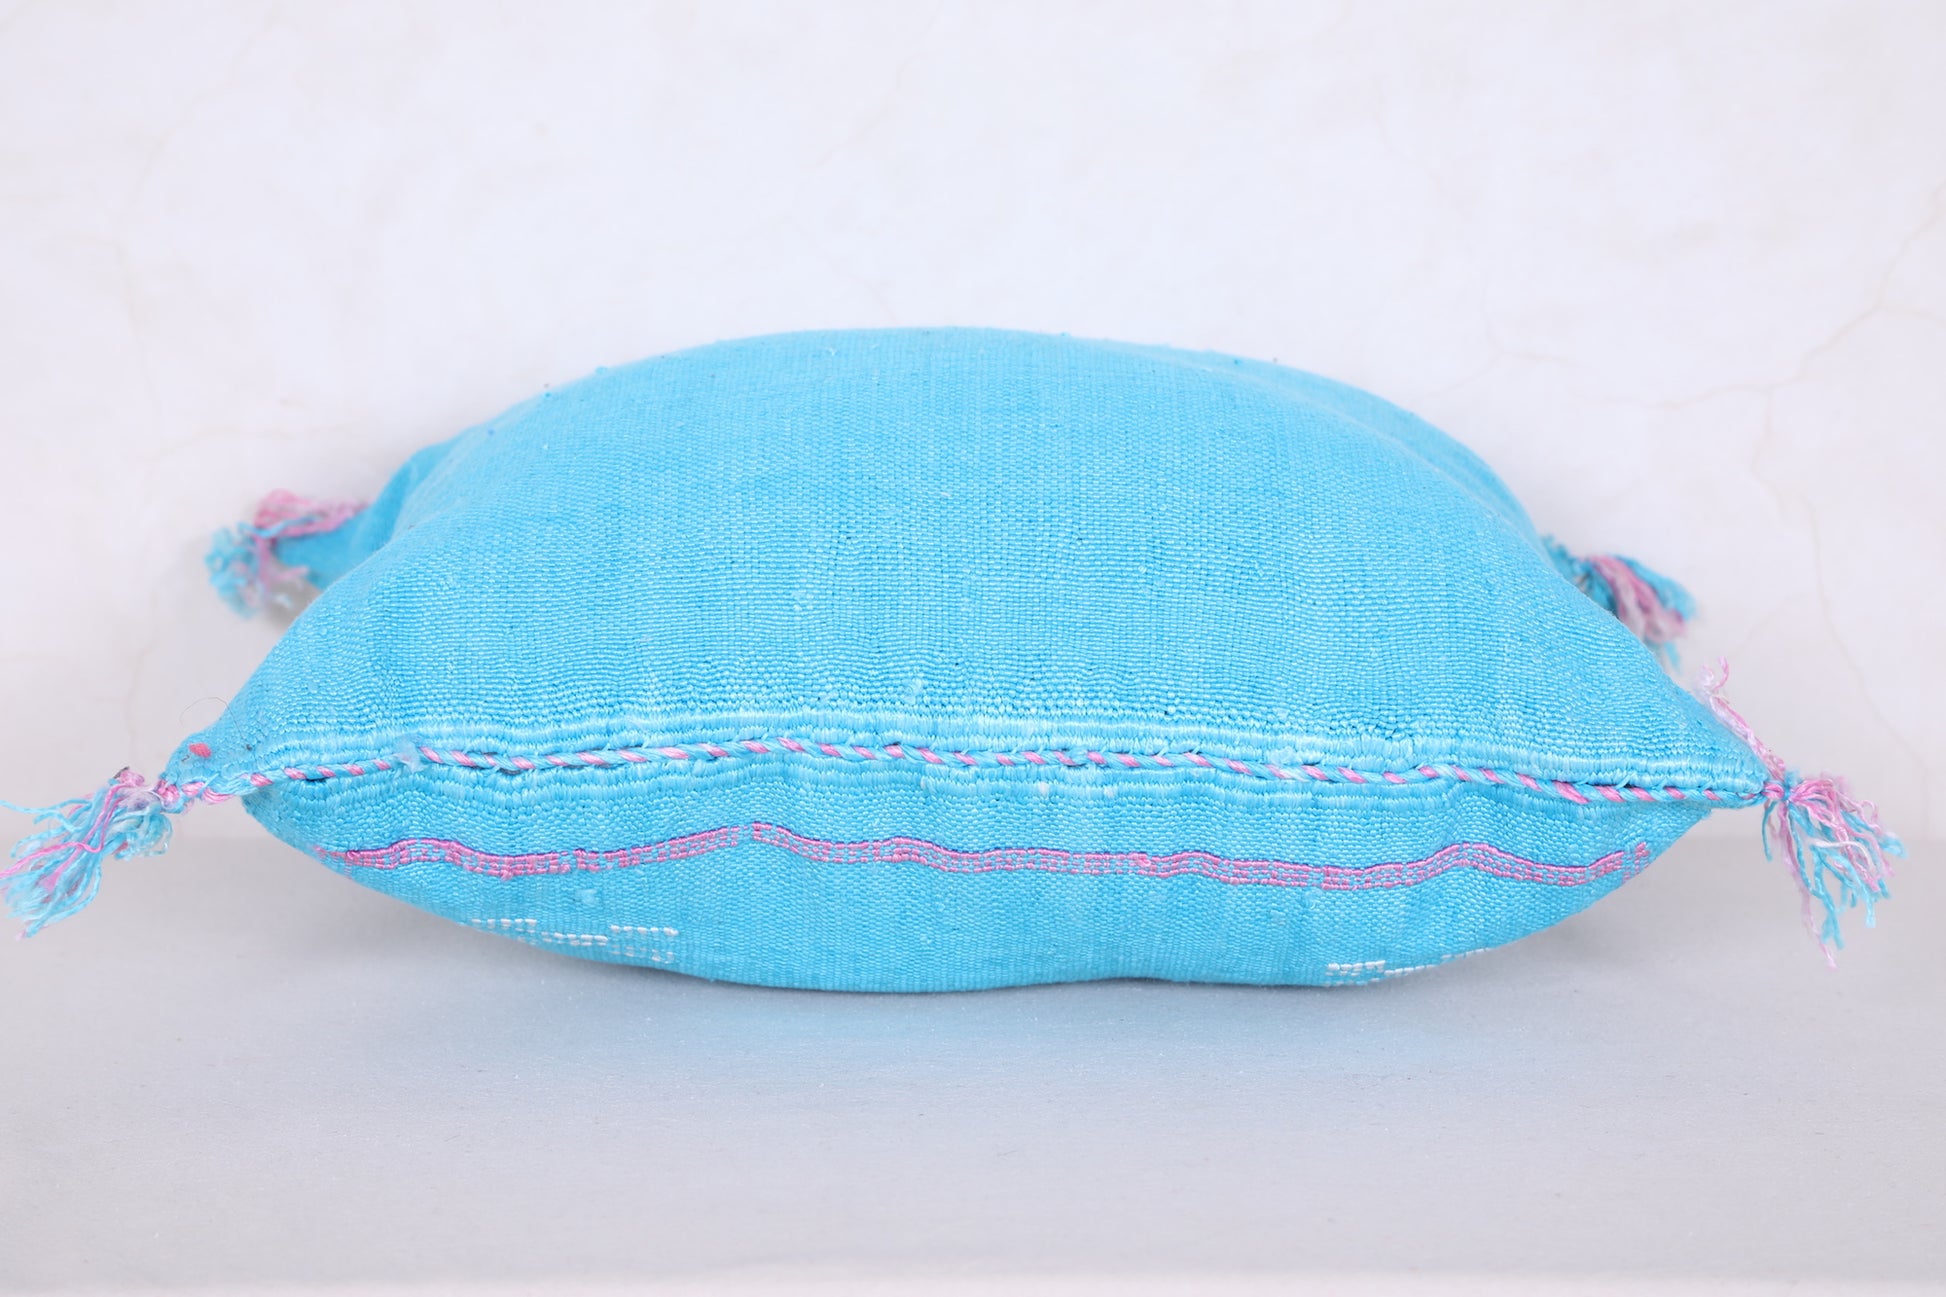 Sky blue Kilim Pillow 17.7 INCHES X 18.5 INCHES